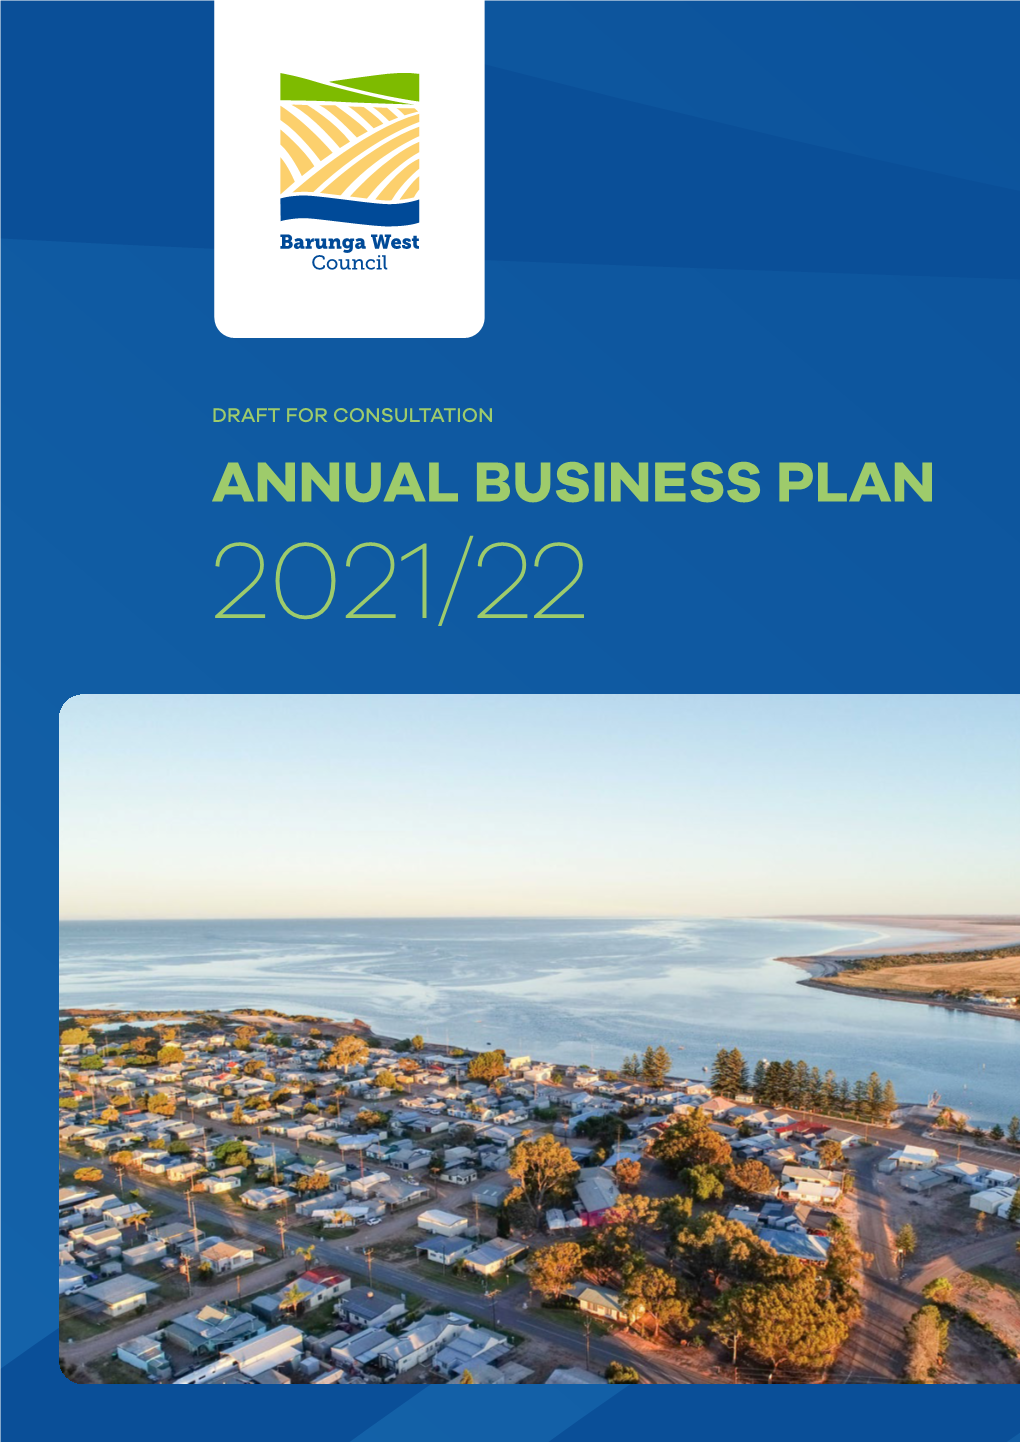 Annual Business Plan 2021/22 a Message from the Mayor